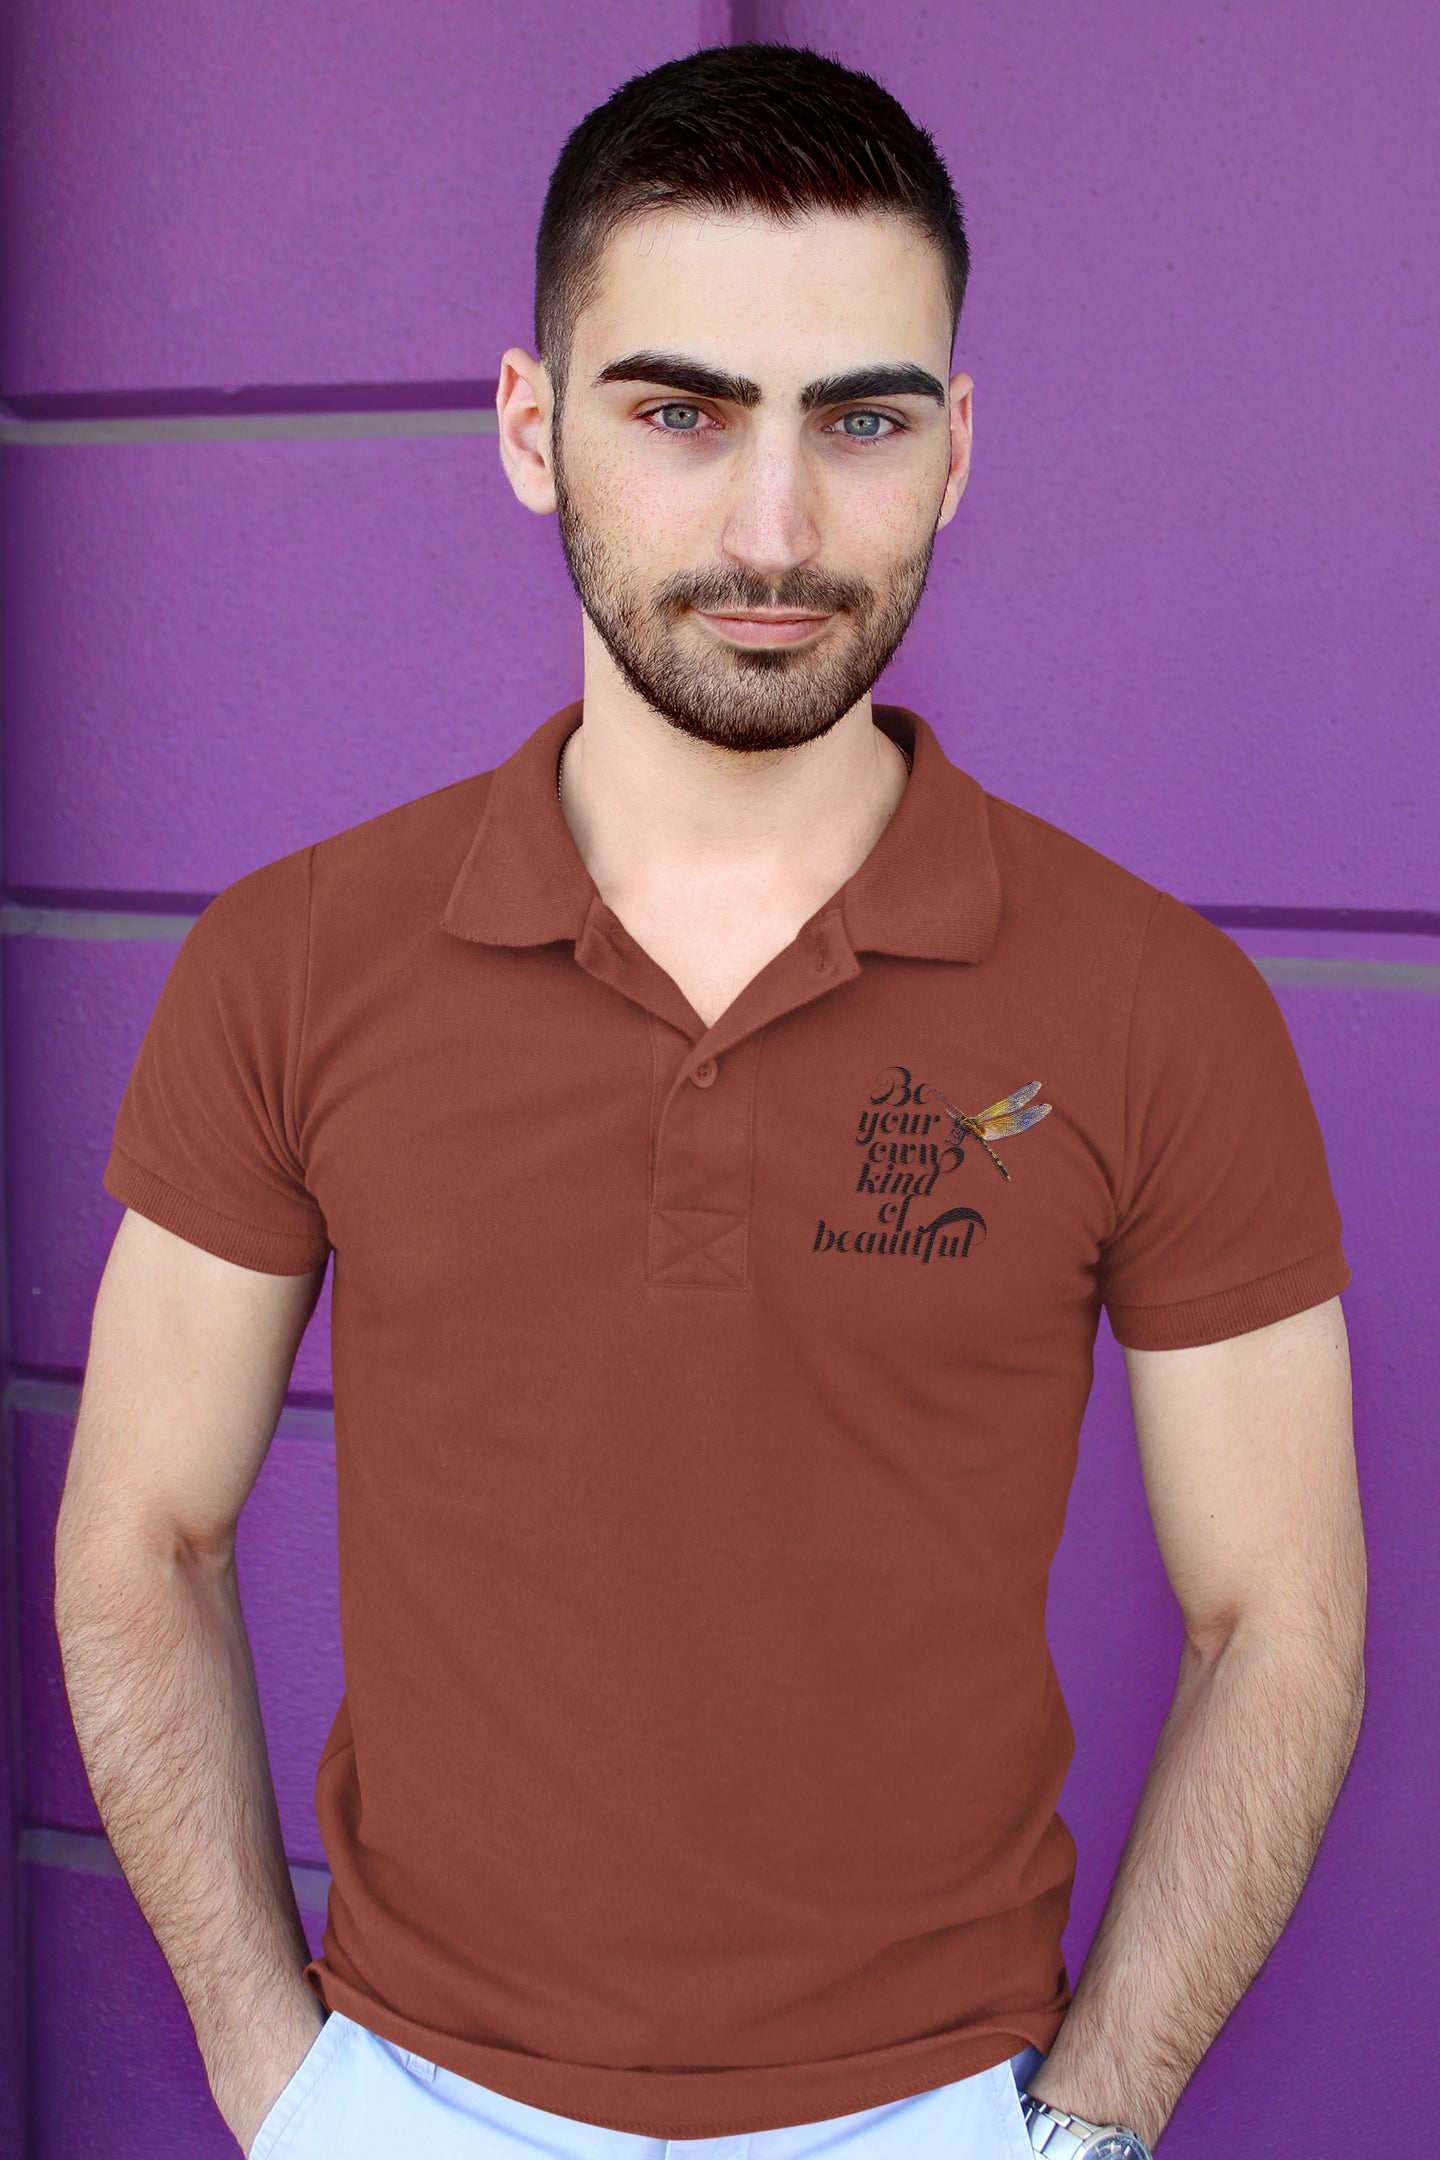 Own Kind Of Beautiful Polo T-shirt for Men